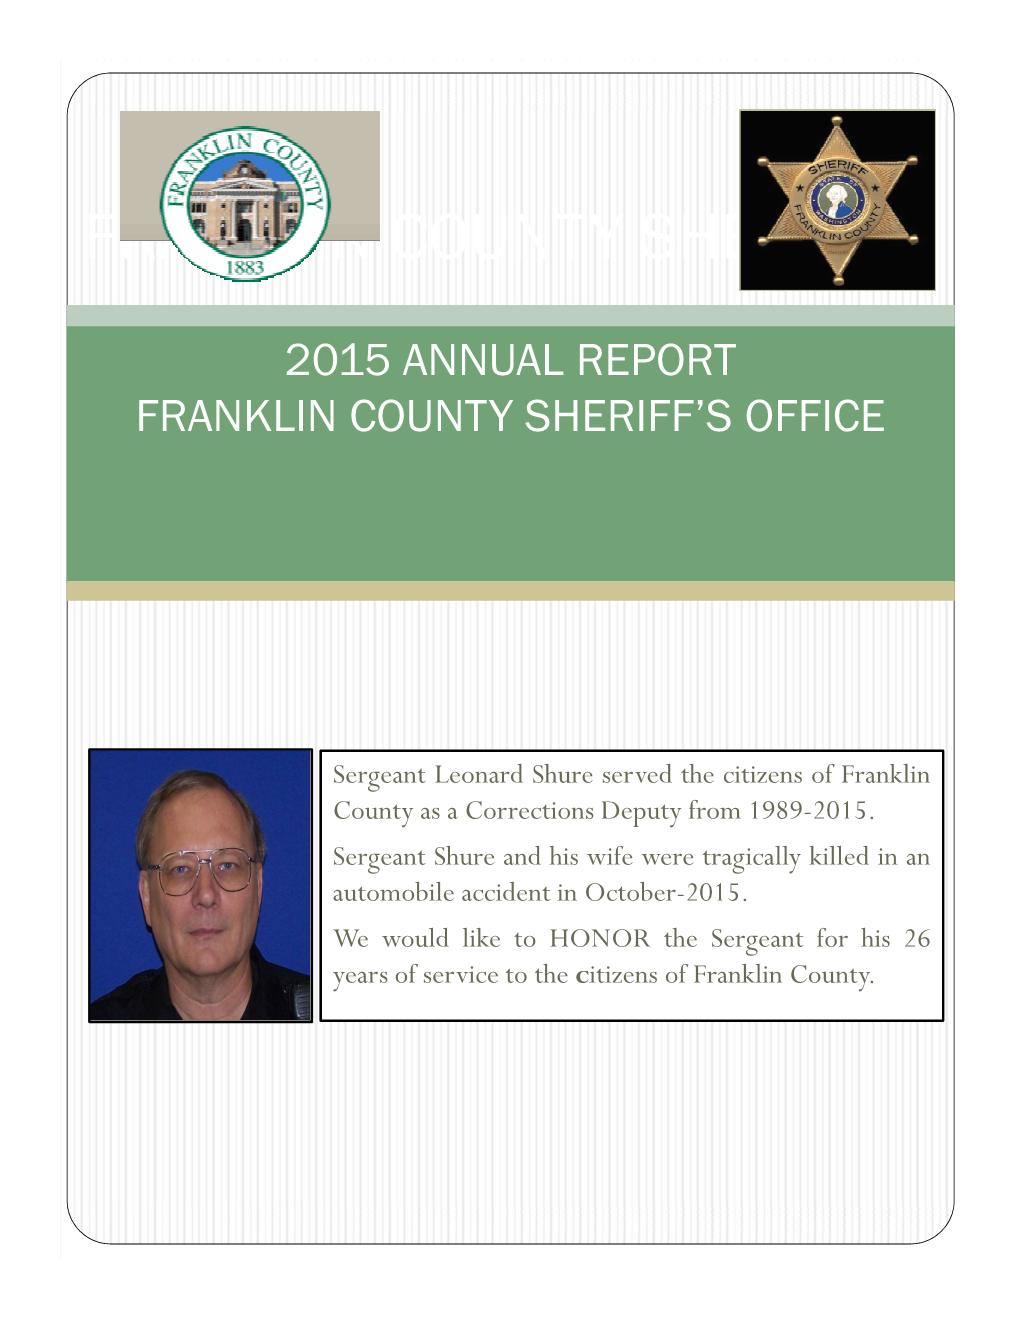 2015 Annual Report Franklin County Sheriff's Office